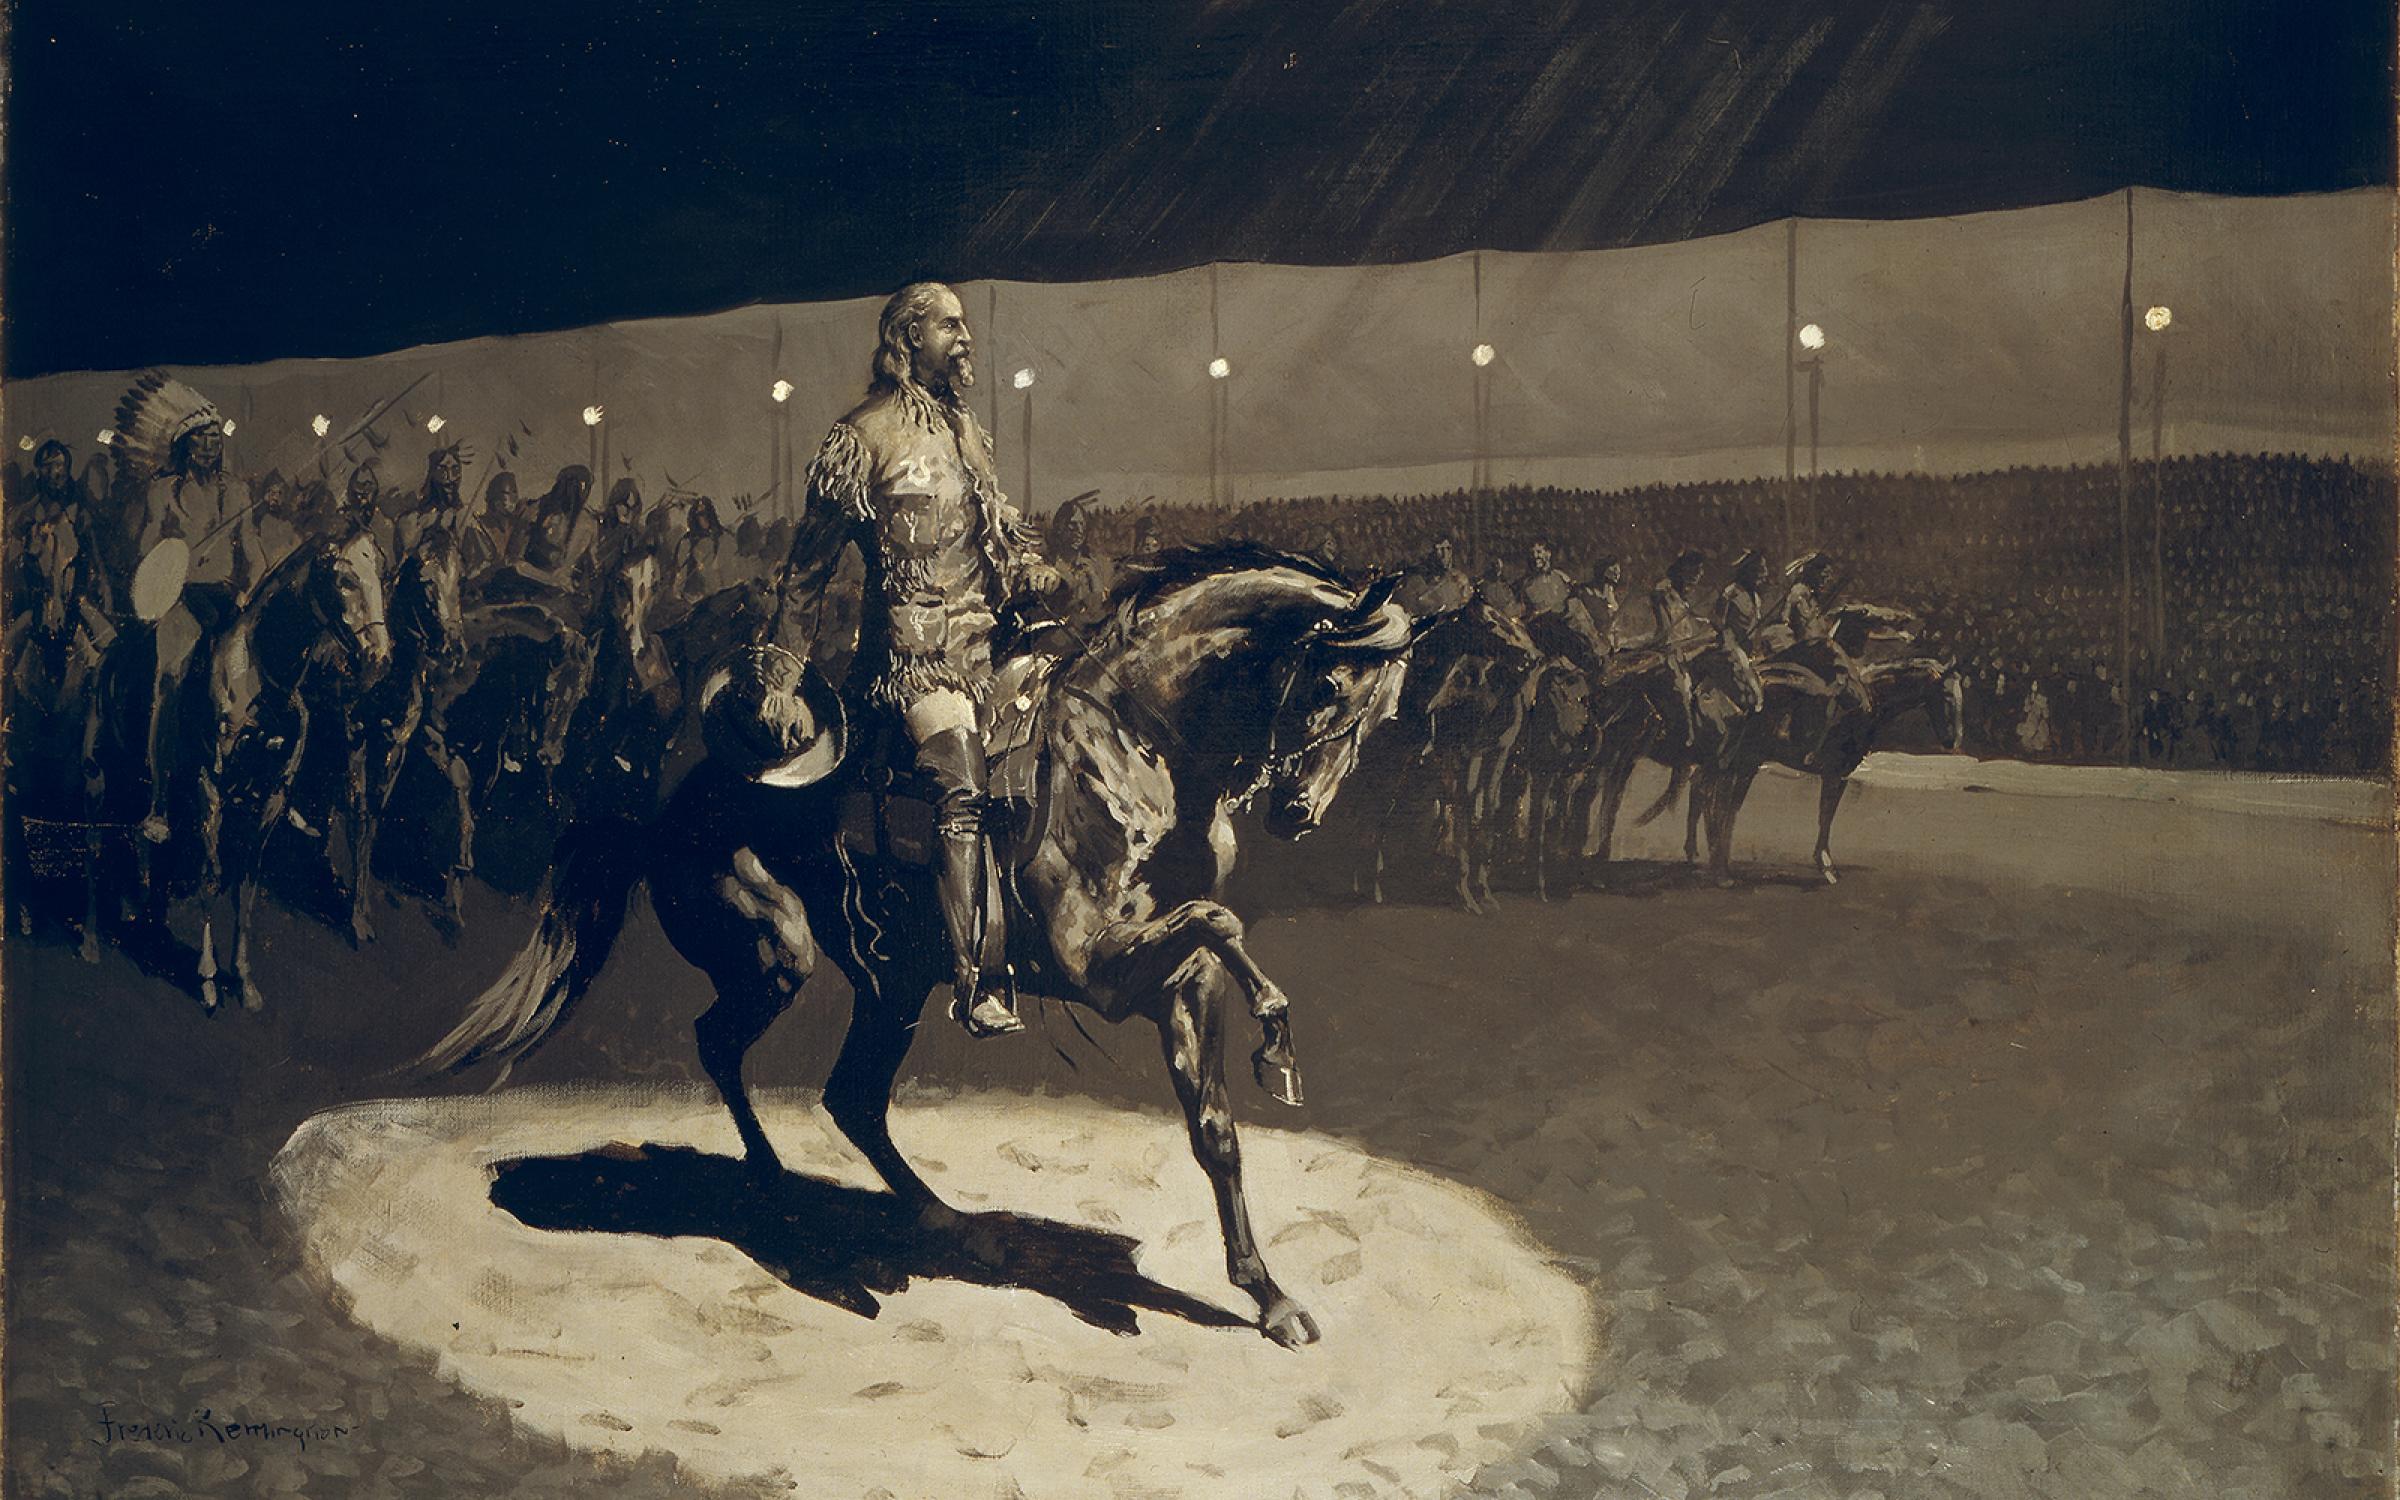 Frederic Remington (American, 1861-1909), Buffalo Bill in the Limelight, ca. 1899 oil on canvas, 35.5 x 48.5 in. (frame), Buffalo Bill Center of the West, Cody, Wyoming, USA, Gift of The Coe Foundation, H. P. Skoglund, Ernest Goppert, Sr., and John S. Bugas 23.71